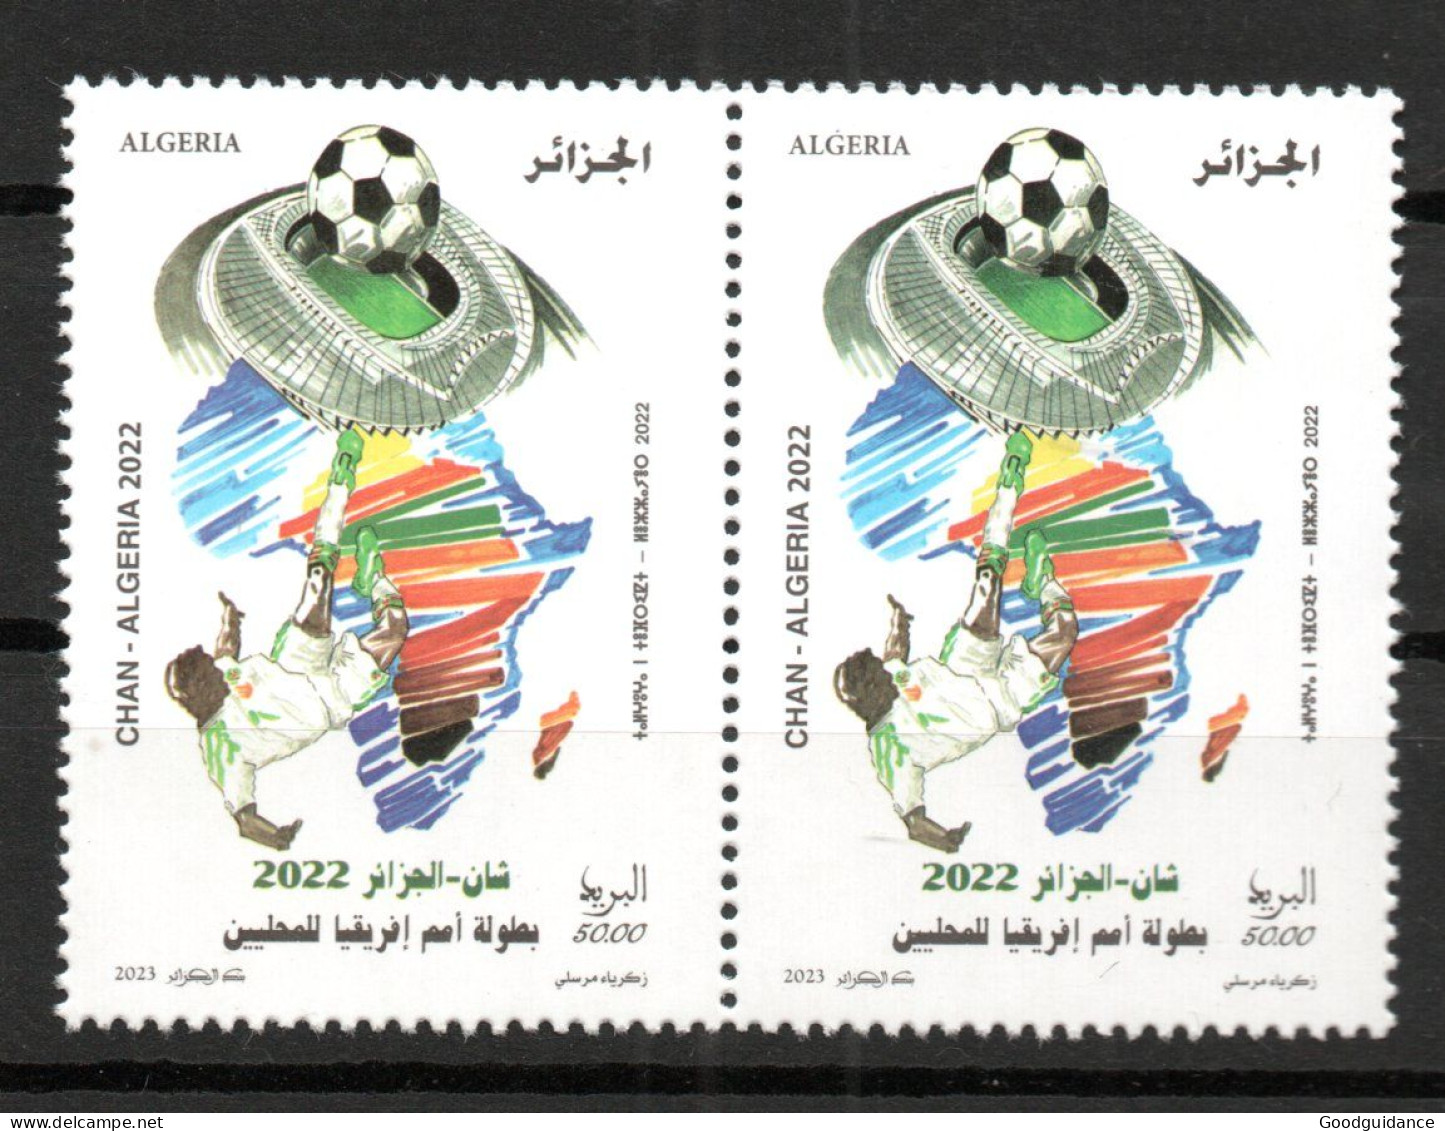 2023 - Algeria - The 7th Africa Cup Of Nations Football Championships 2022- Soccer- Stadium - Map - Pair- Set 1v.MNH** - Africa Cup Of Nations